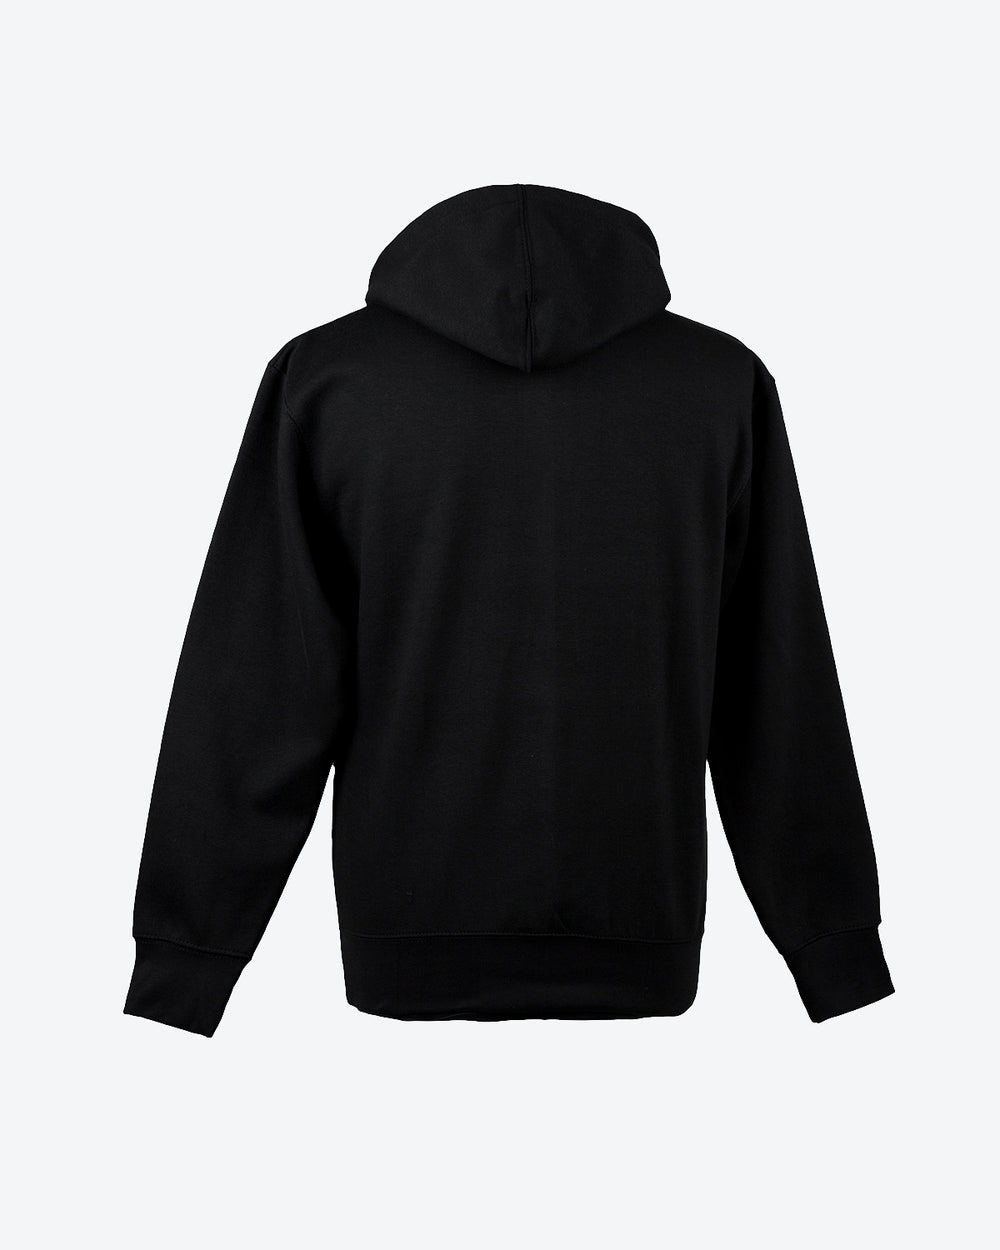 NO BHVR Large Embroidered Hoodie